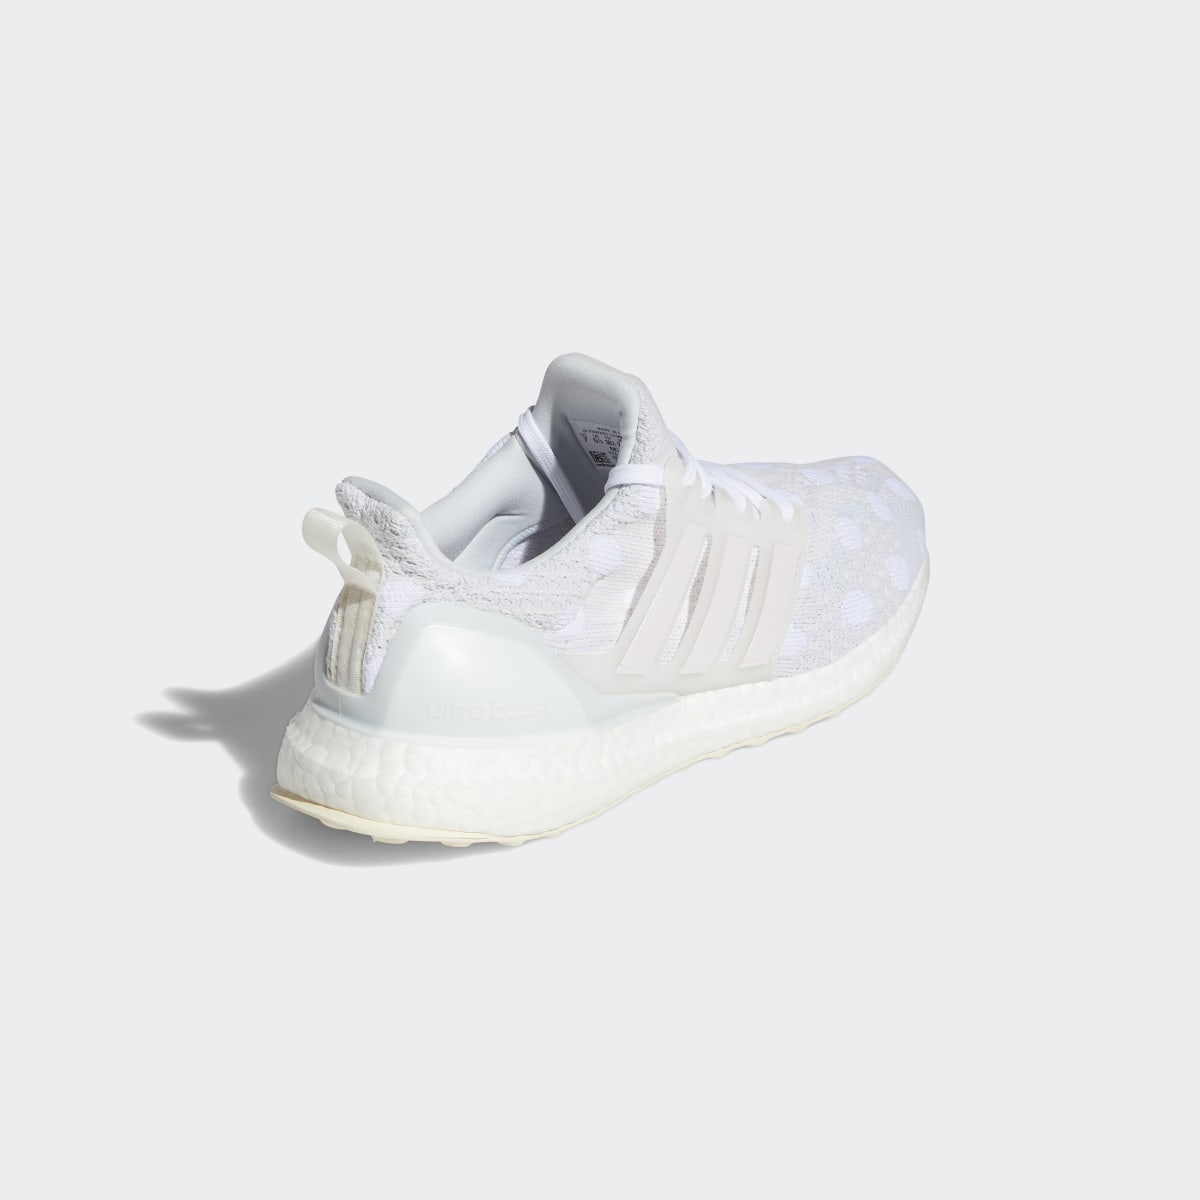 Adidas Ultraboost 5 DNA Shoes. 6